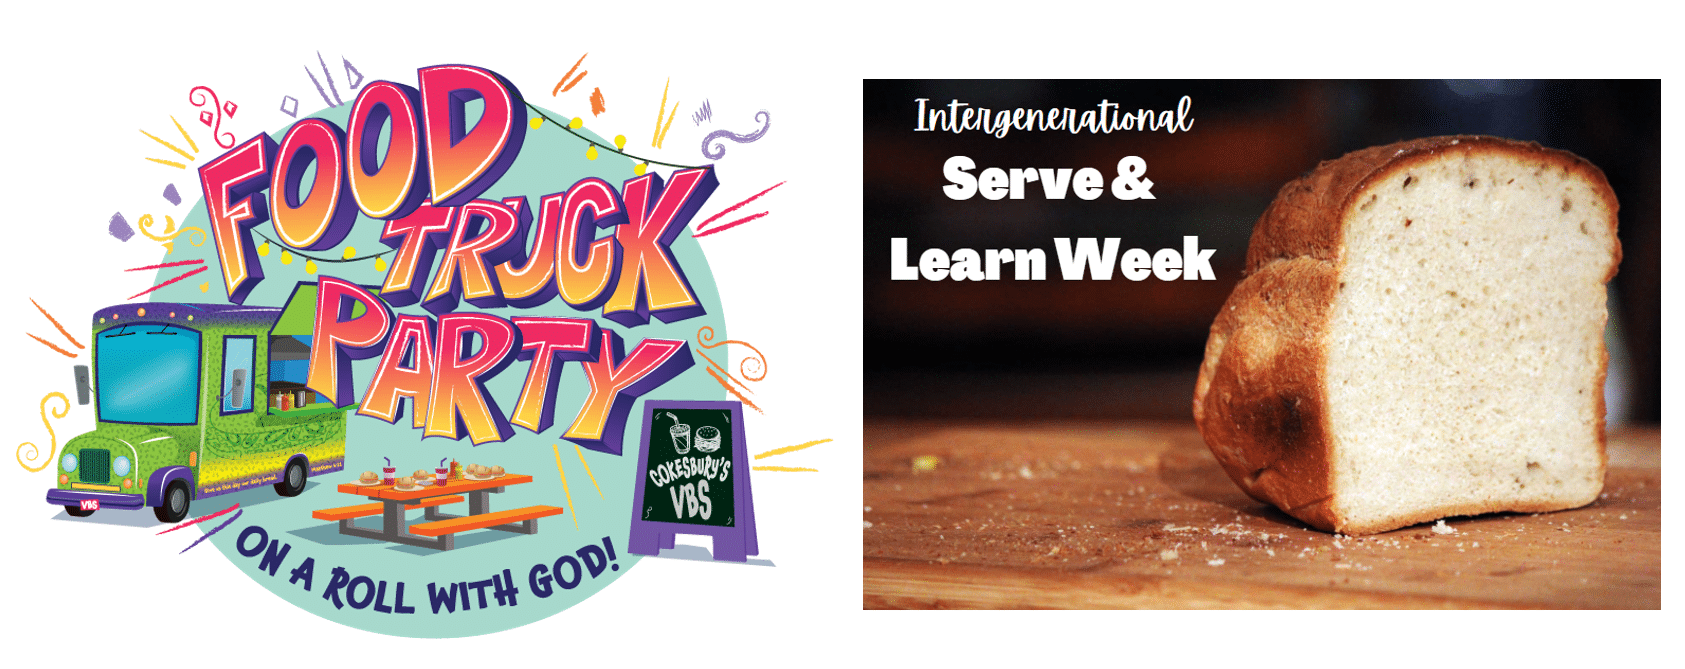 Food Truck Party VBS & Intergenerational Serve & Learn Week